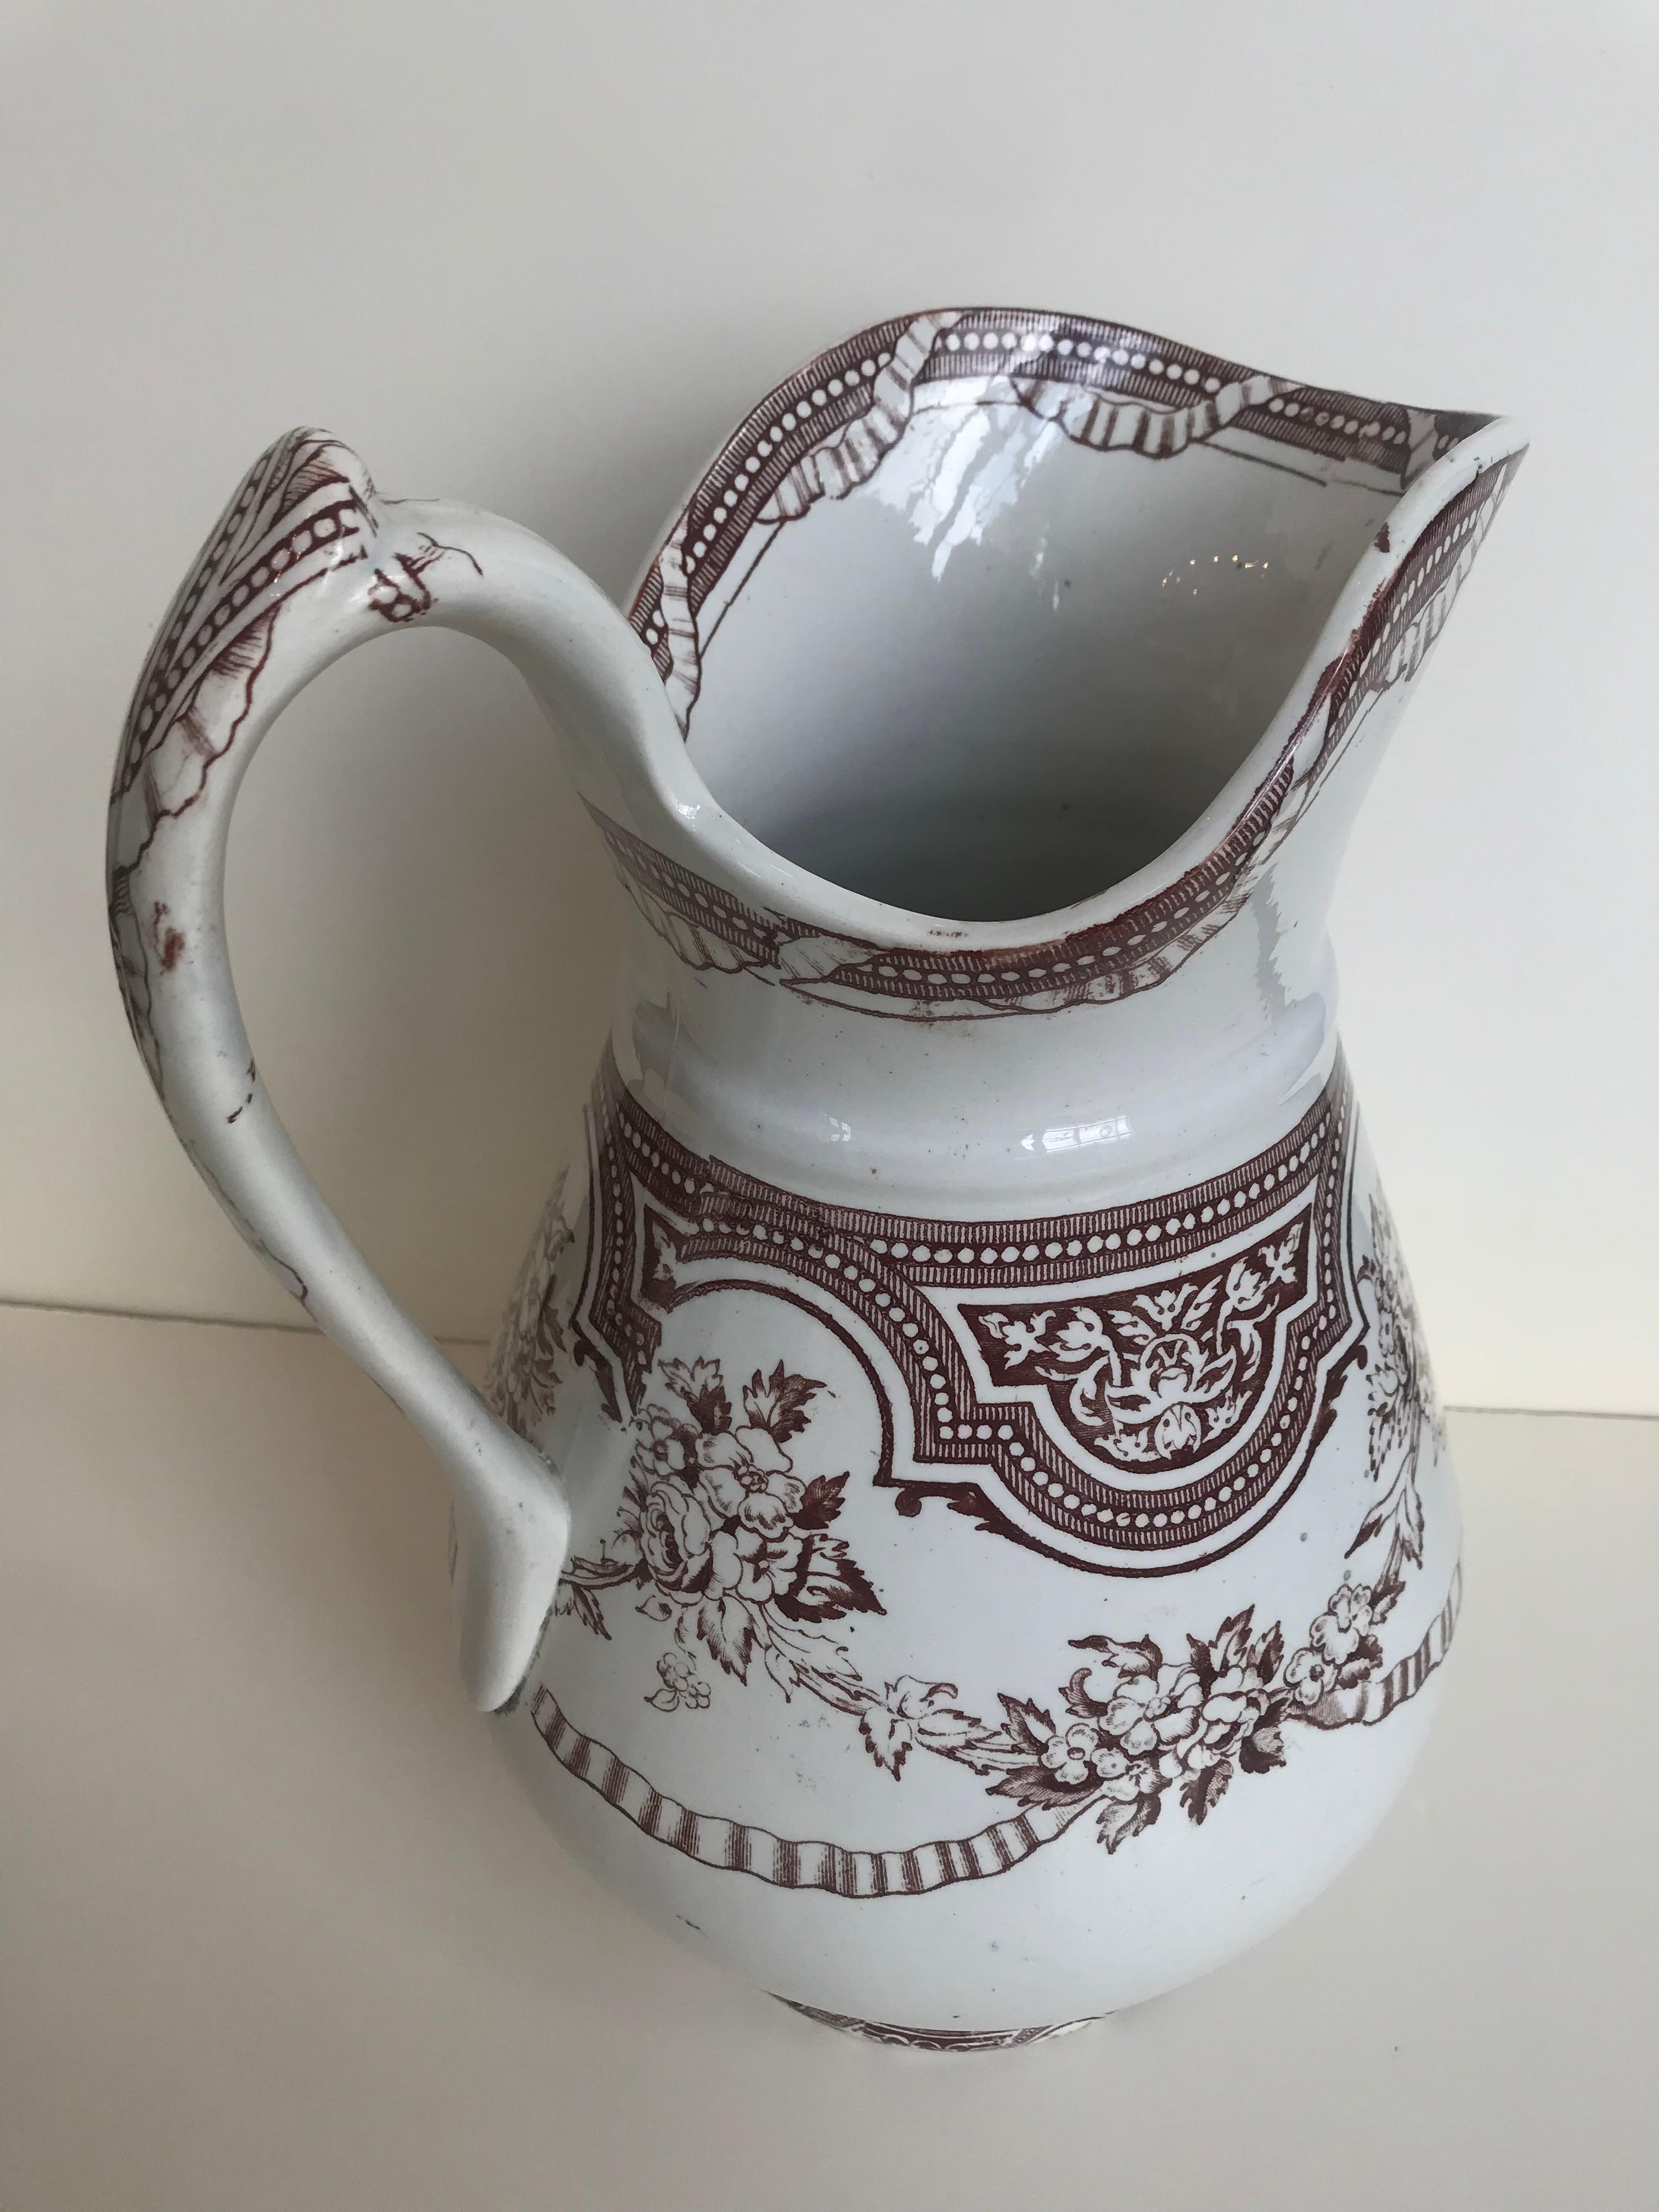 19th century English floral ribbon banded ironstone pitcher.
X marking on bottom.